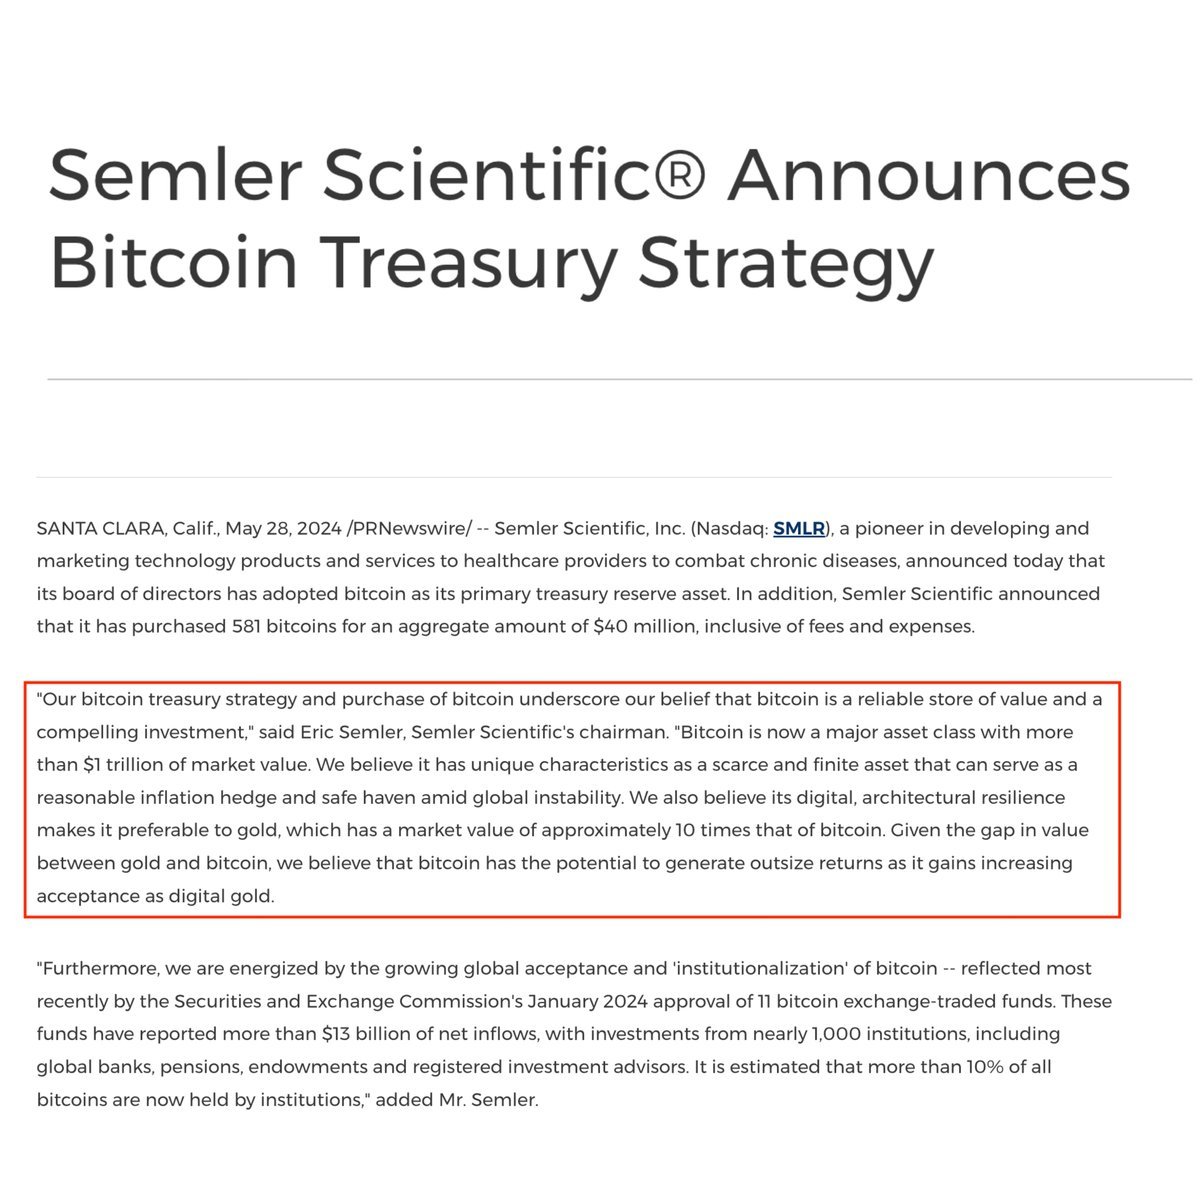 JUST IN: Semlar Scientific has bought $40m #Bitcoin for its balance sheet and adopted Bitcoin as its primary treasury reserve asset.